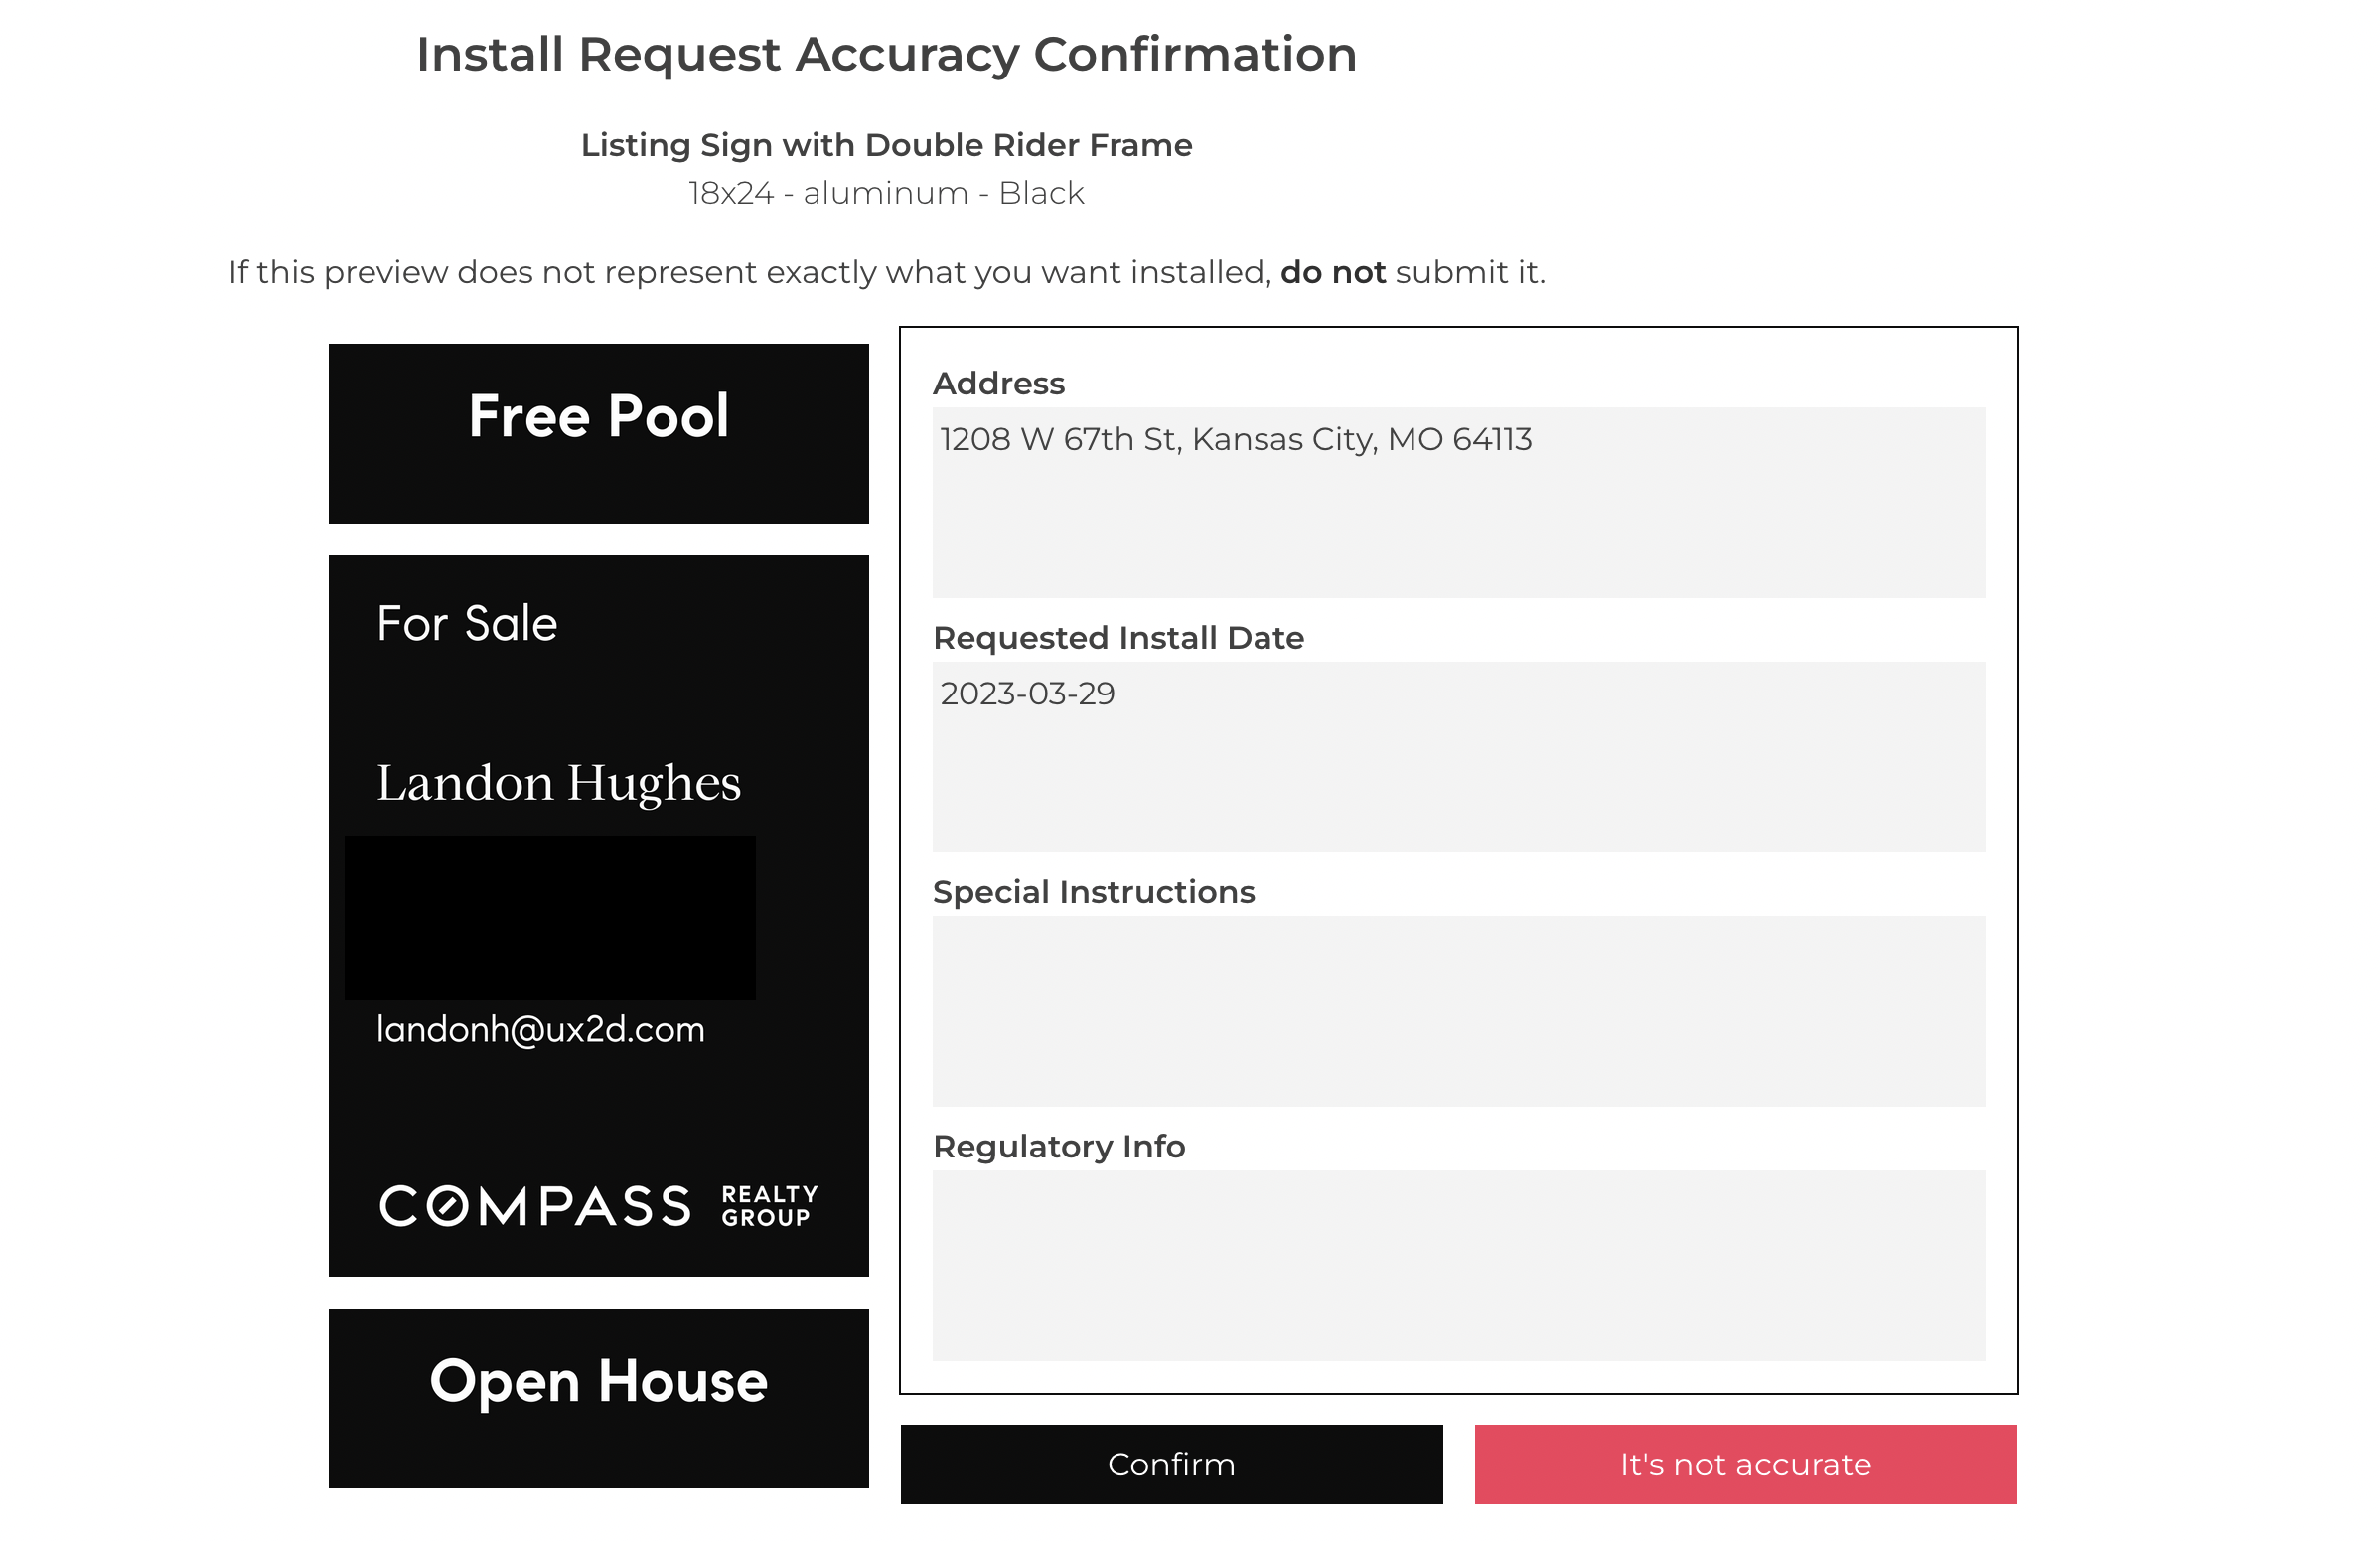 Install Accuracy Confirmation